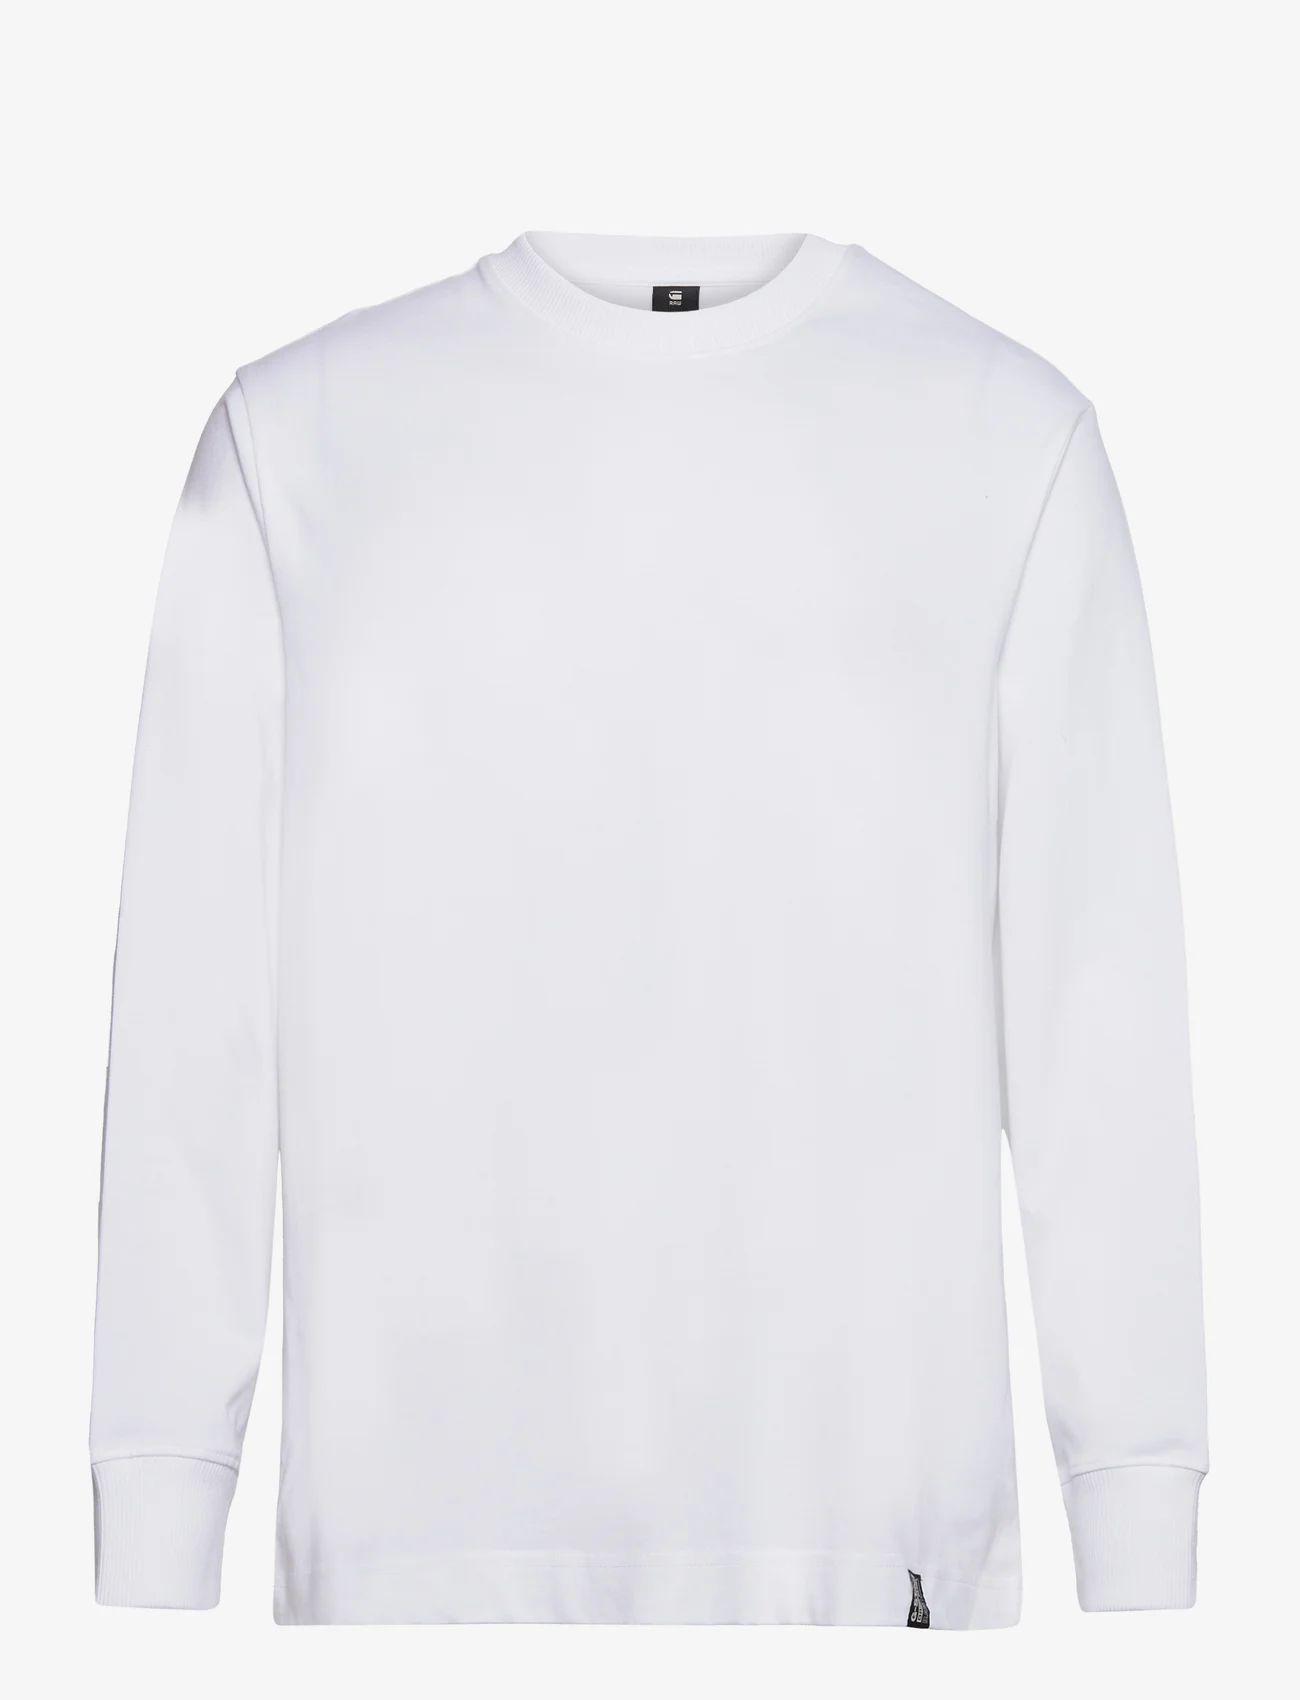 G-Star RAW - Essential loose r t l\s - basis-t-skjorter - white - 0